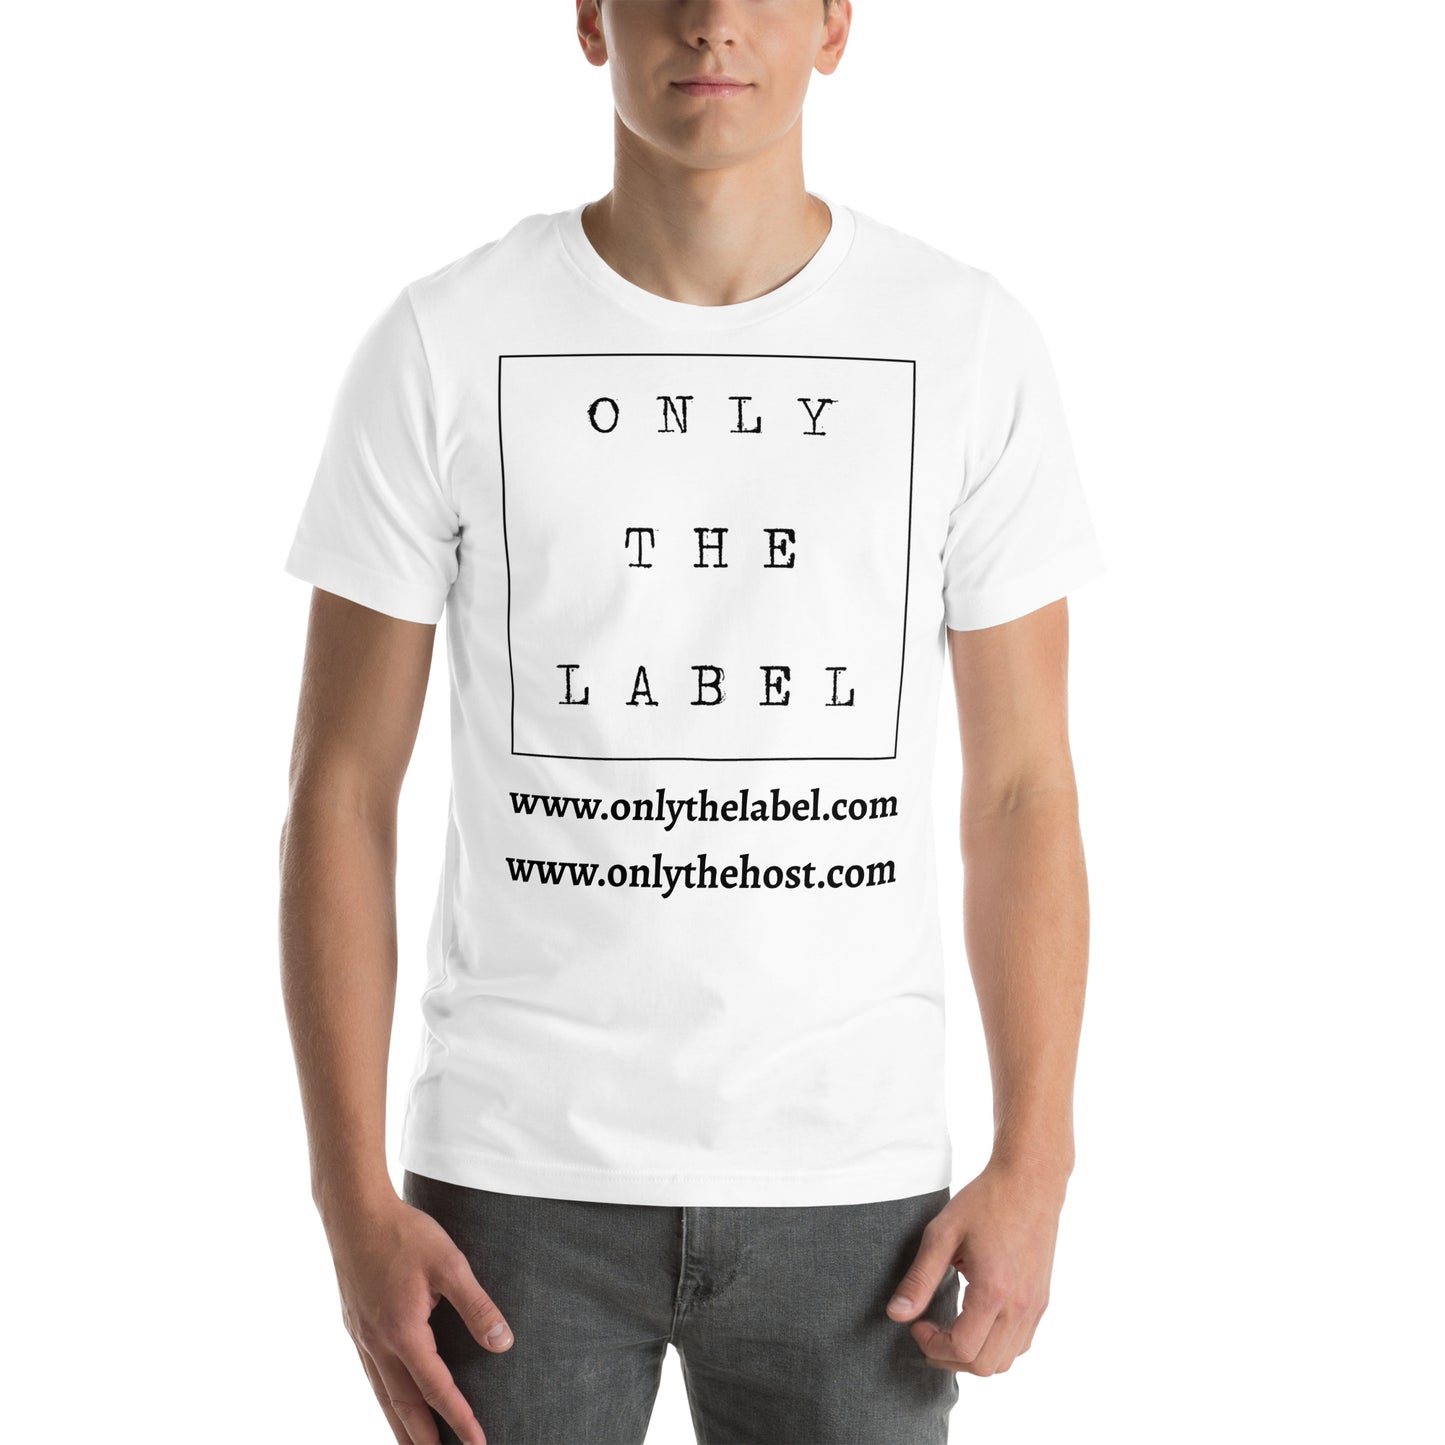 Only The Label Logo And Websites T-Shirt